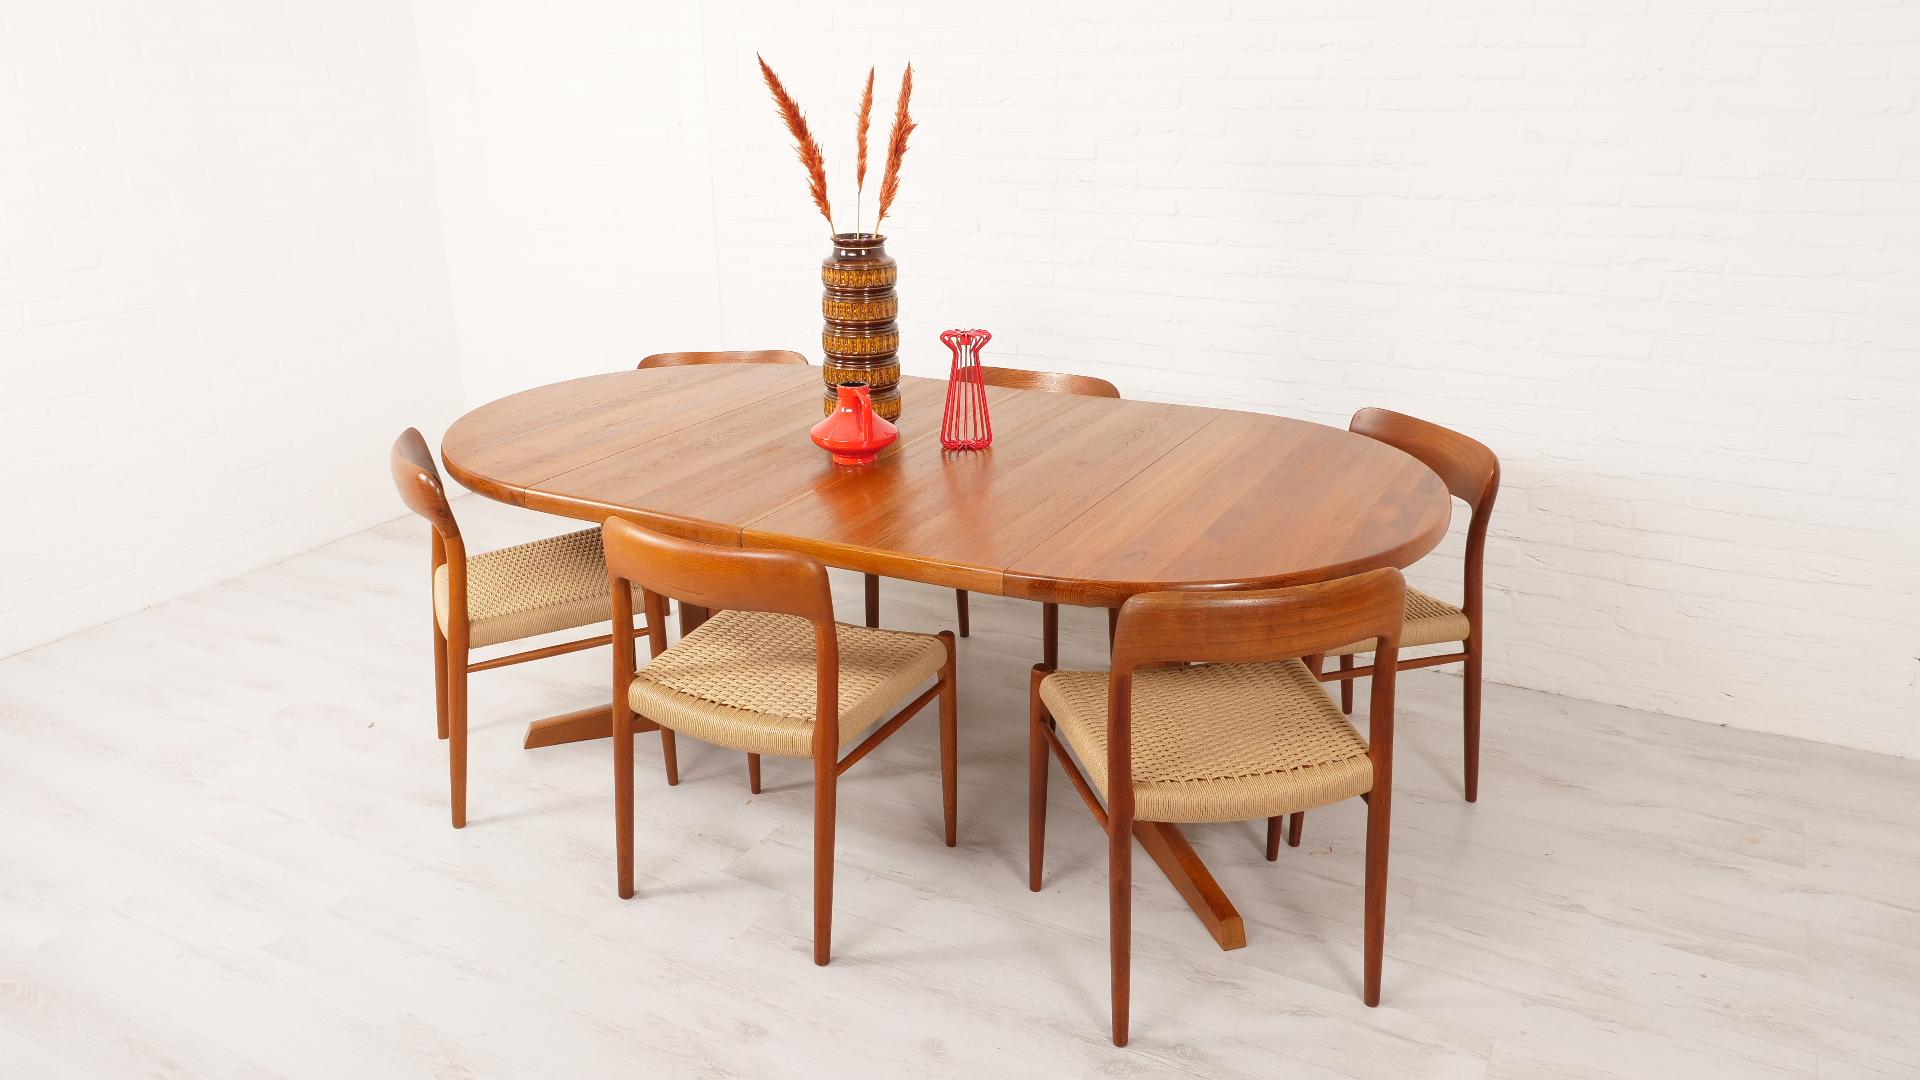 This beautiful, large round vintage dining table was designed by Niels Otto Møller in Denmark. The table is made of solid teak wood. A true example of Danish top quality! The round wooden dining table can be extended into an oval dining table with 2